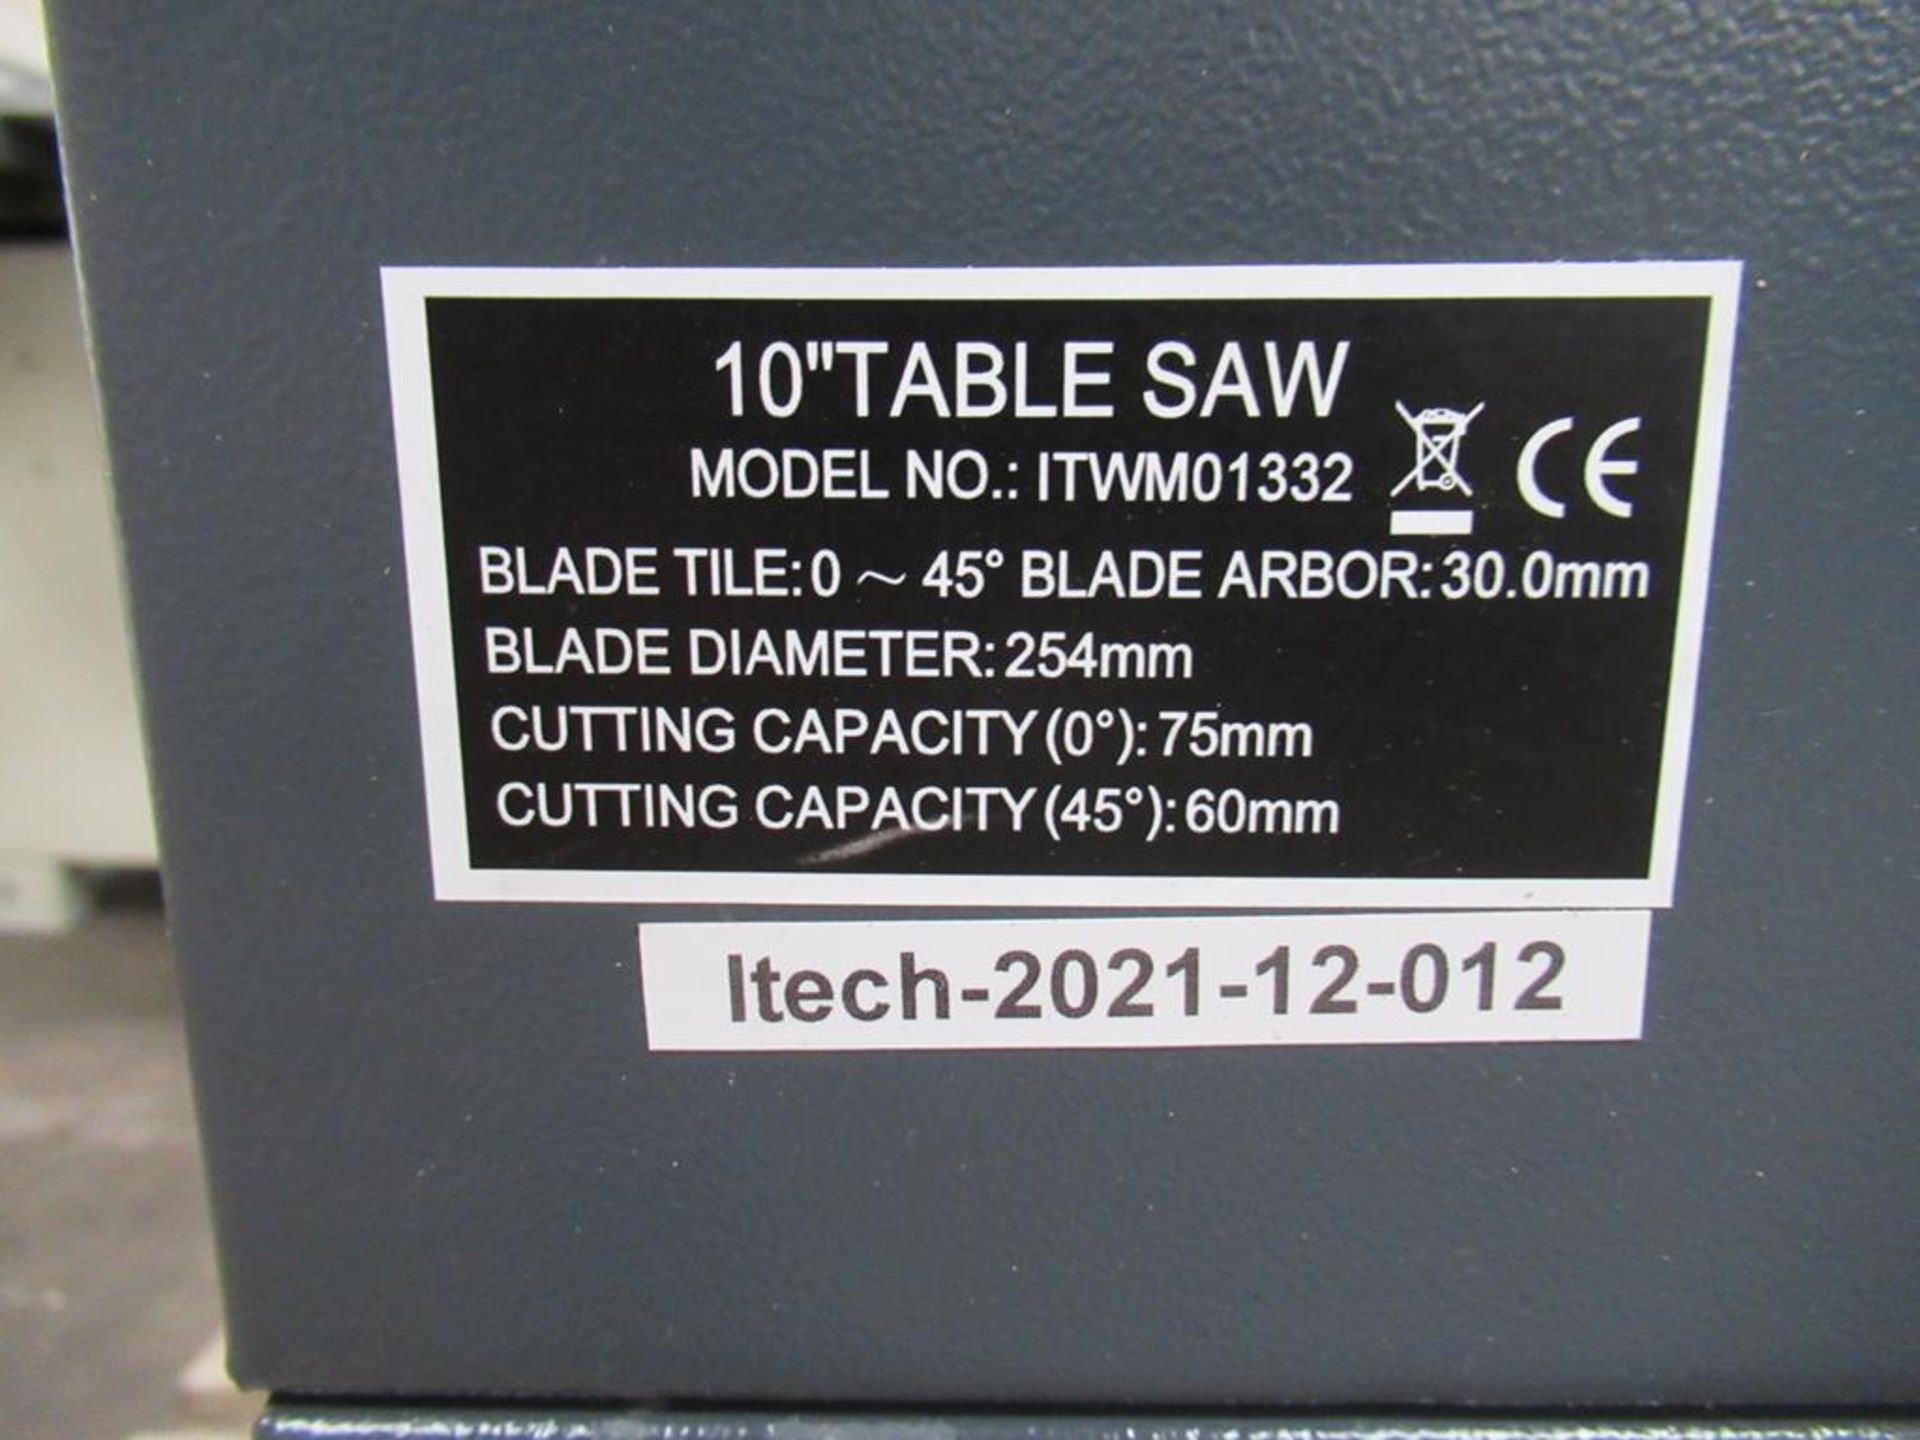 iTech 10" table saw model ITWM01332, 240V - Image 3 of 5